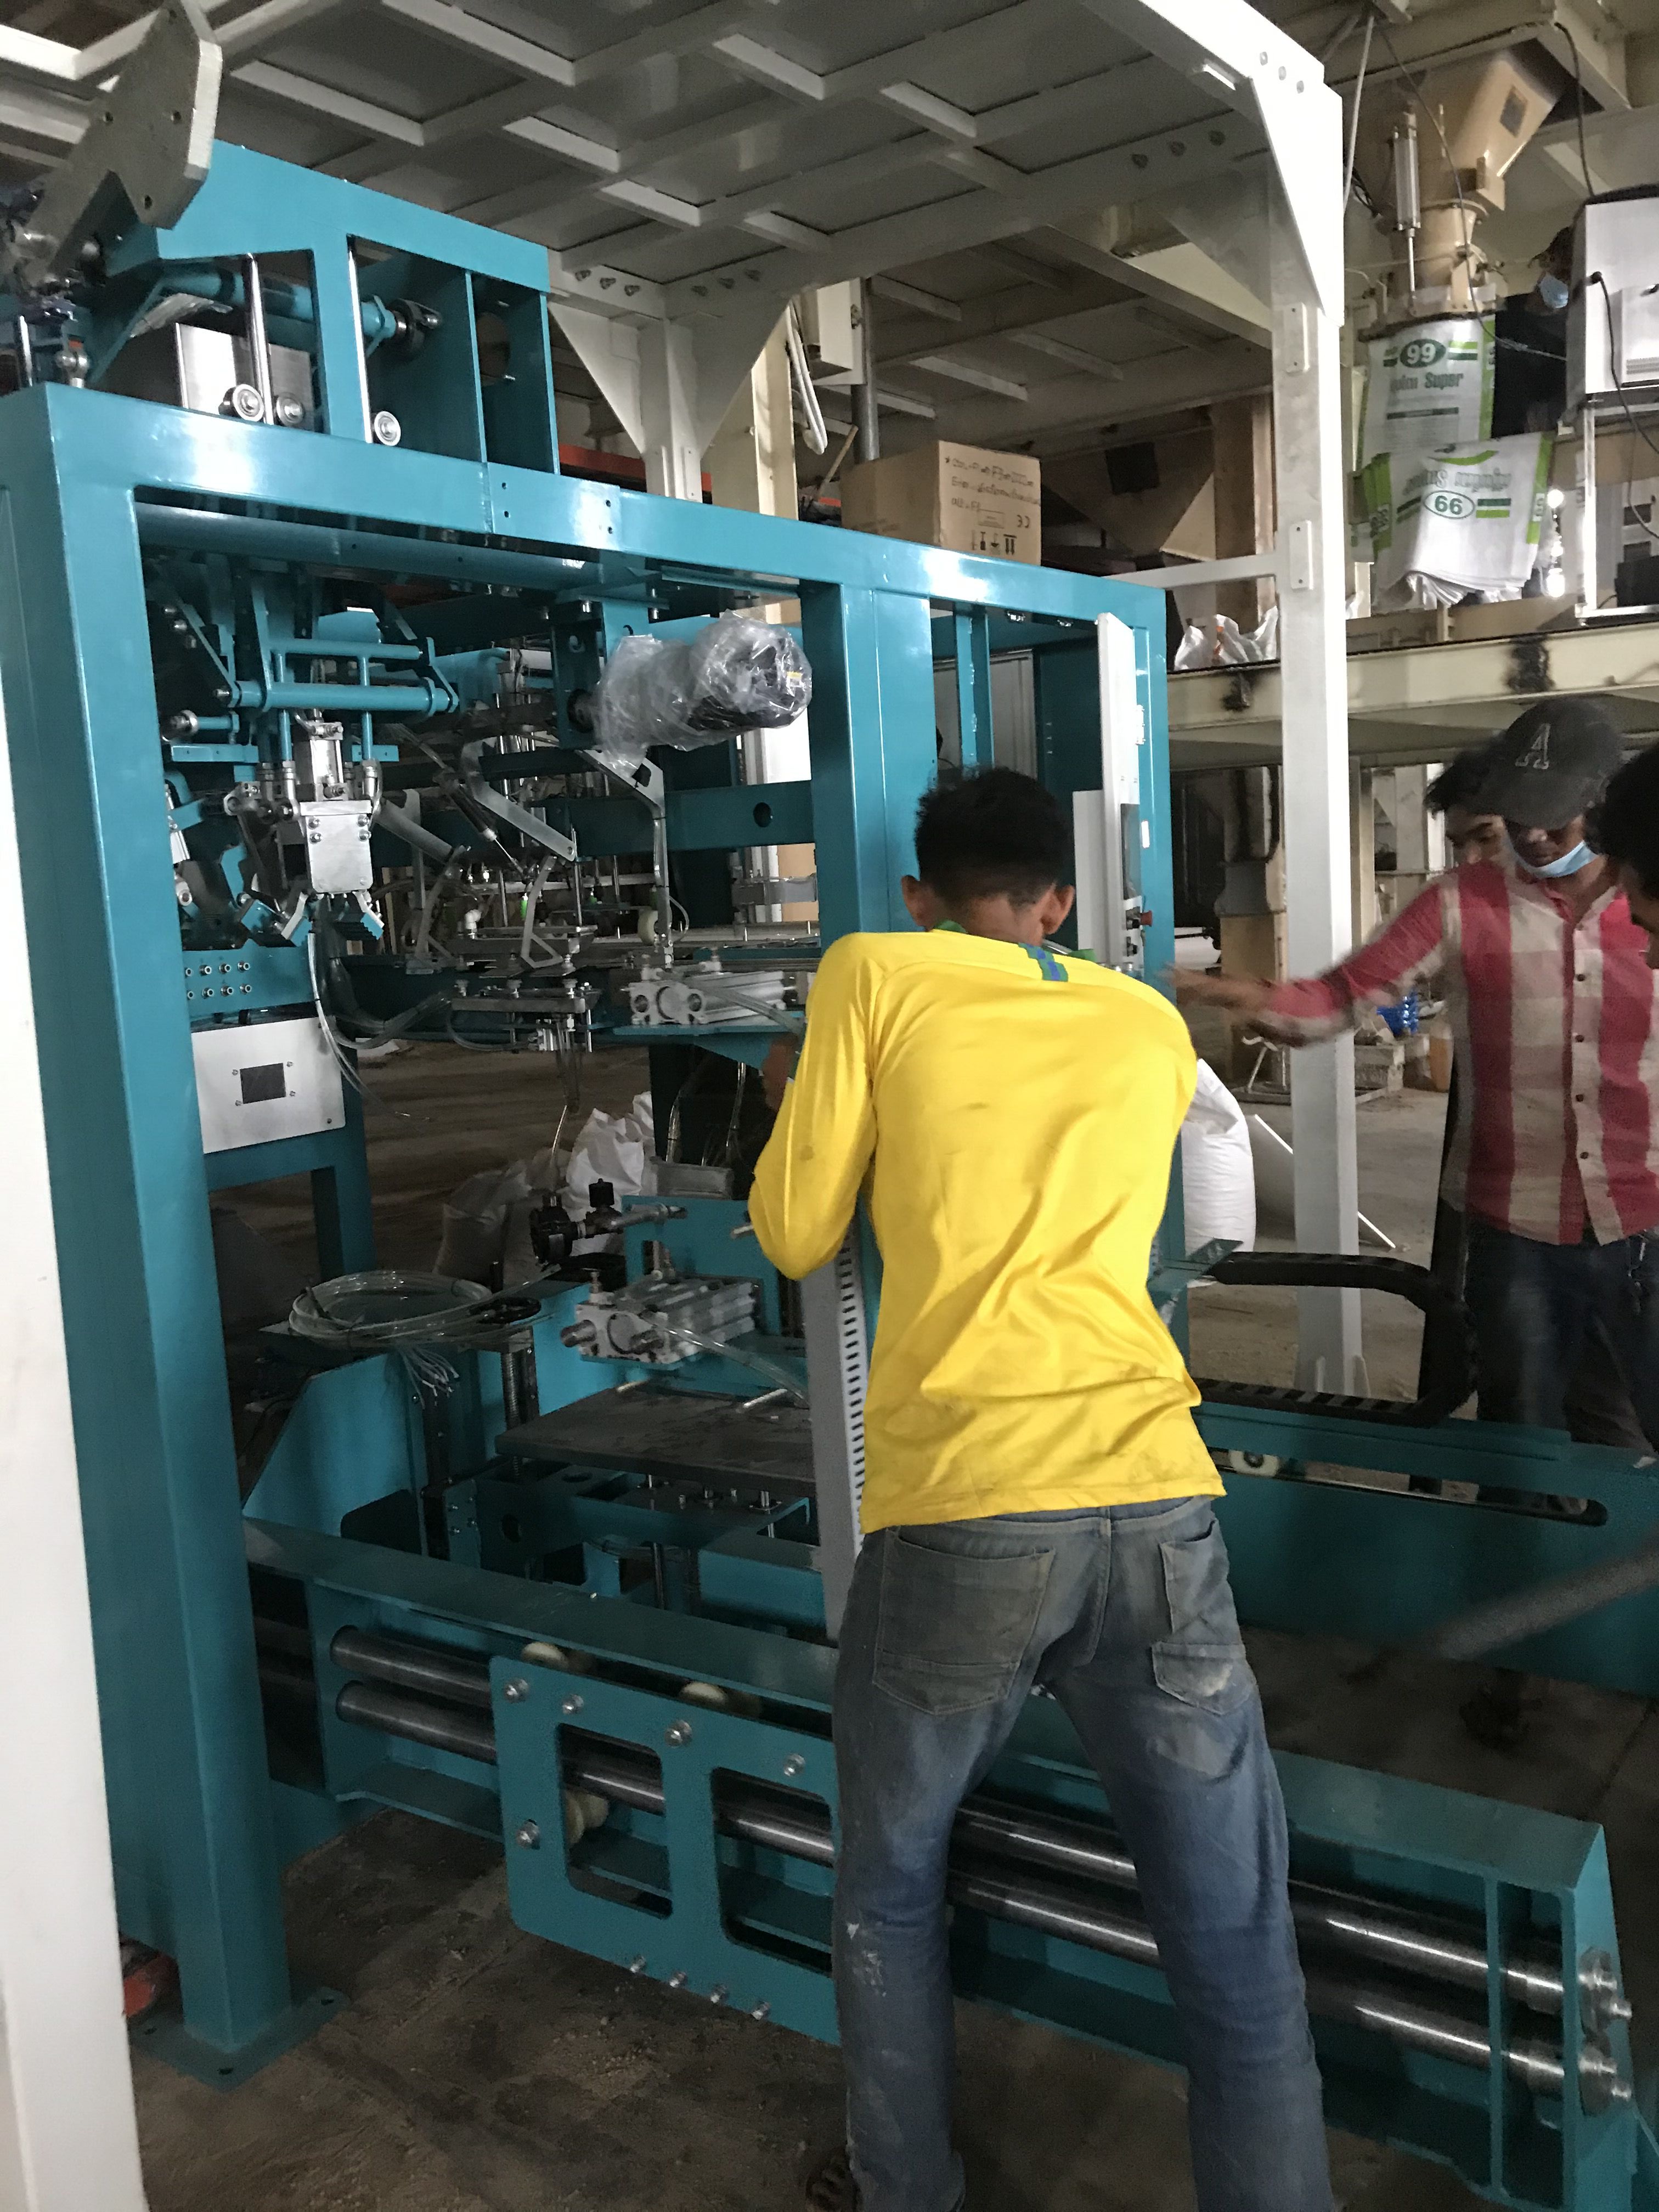 Muriate Potash bagging machine Automated Bagging Line Fully Automatic Packing Palletizing Line, Fully Automatic Packing Line, Fully Automatic Bagging Line, Fully Automatic filling and packaging line, 